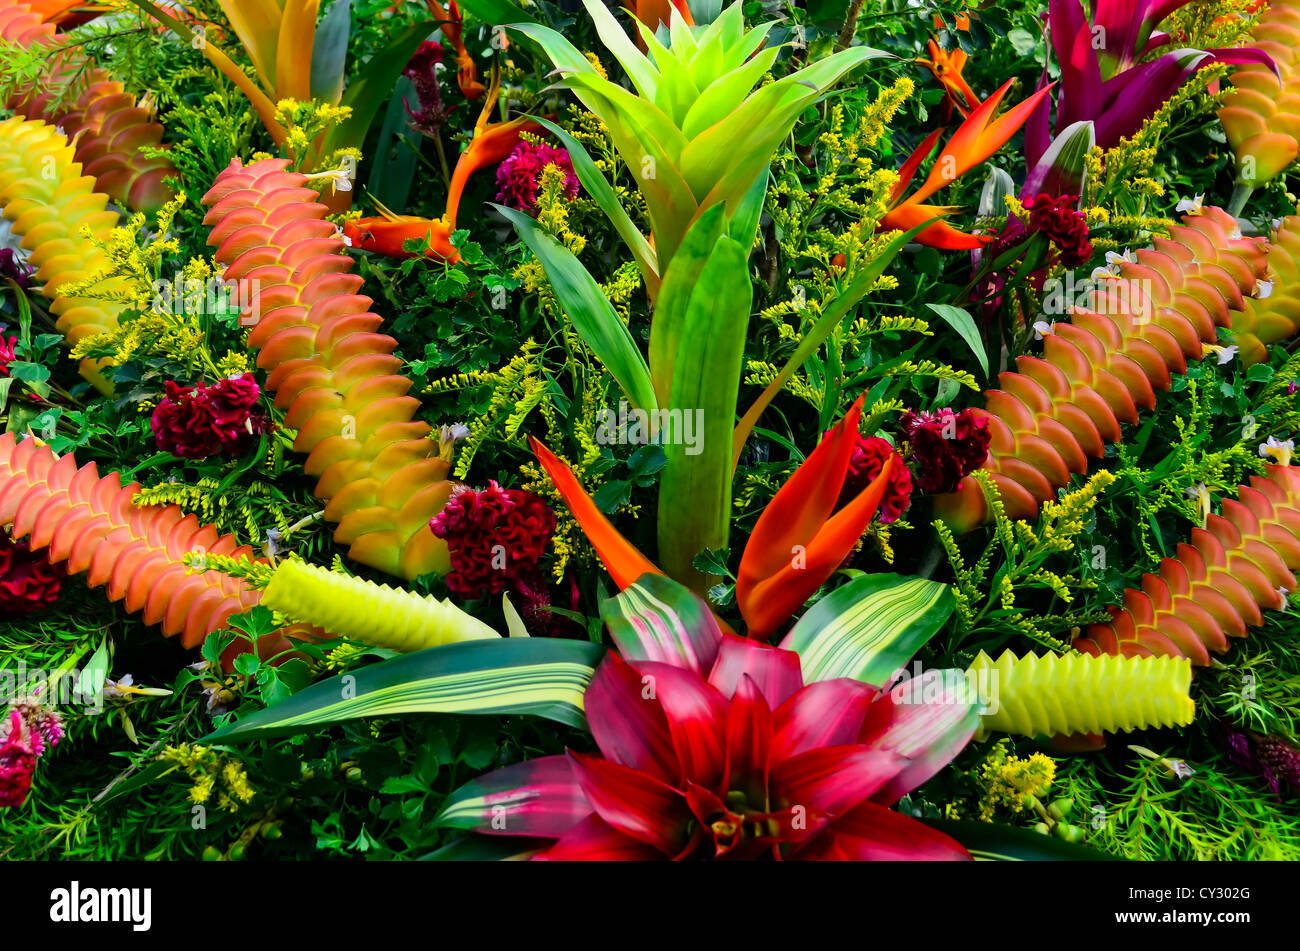 Arrangement of different Bromeliad flowers and other flowering plants Stock Photo